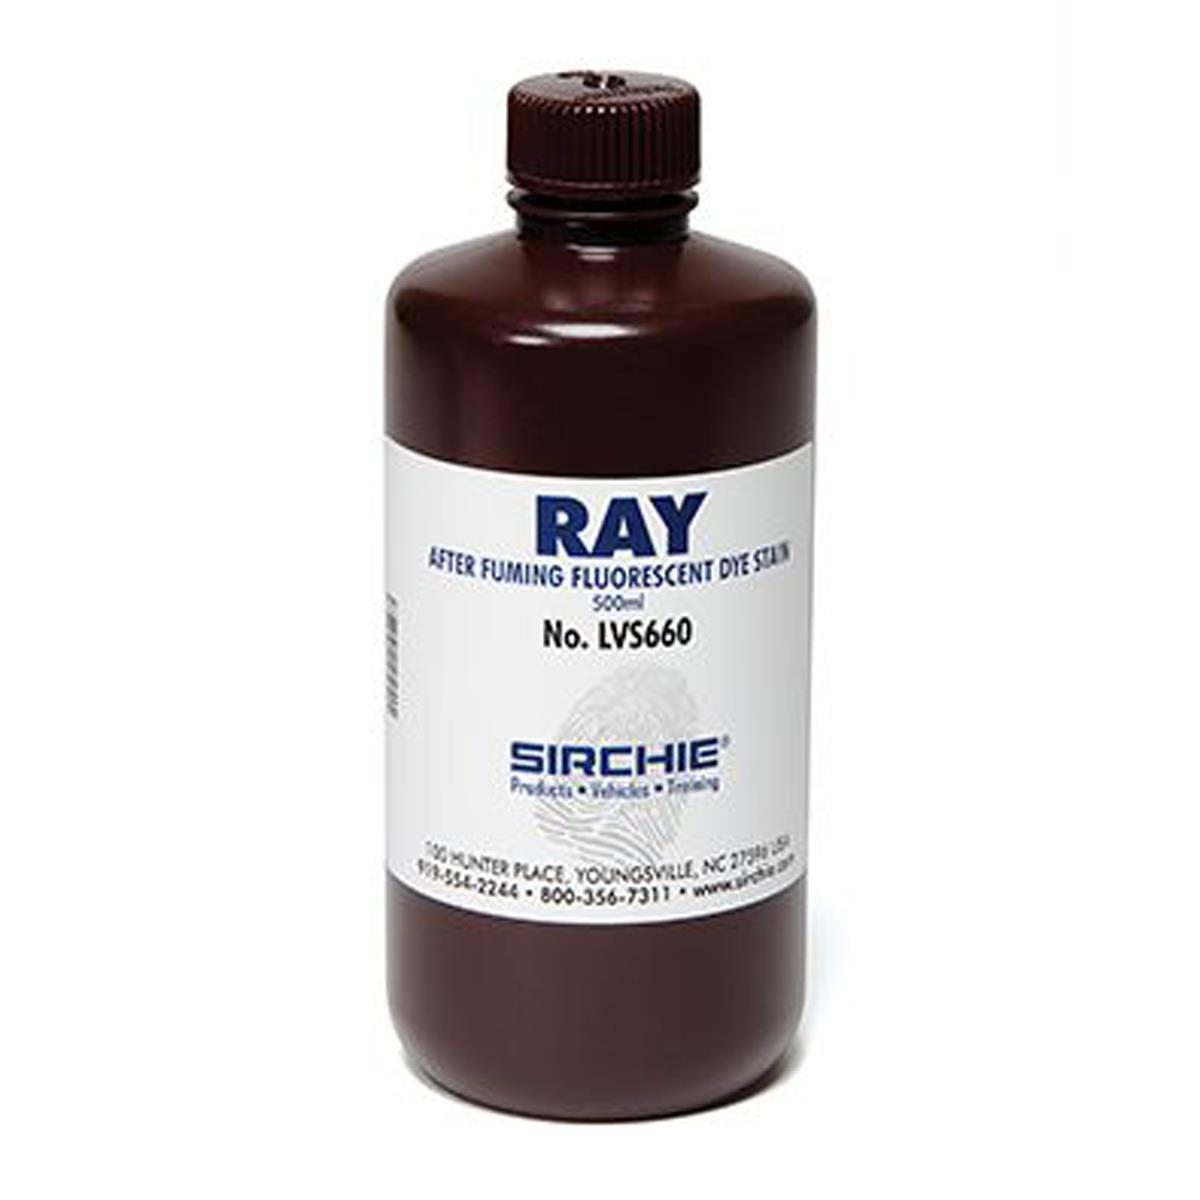 Image of Sirchie RAY After Fuming Fluorescent Dye Stain